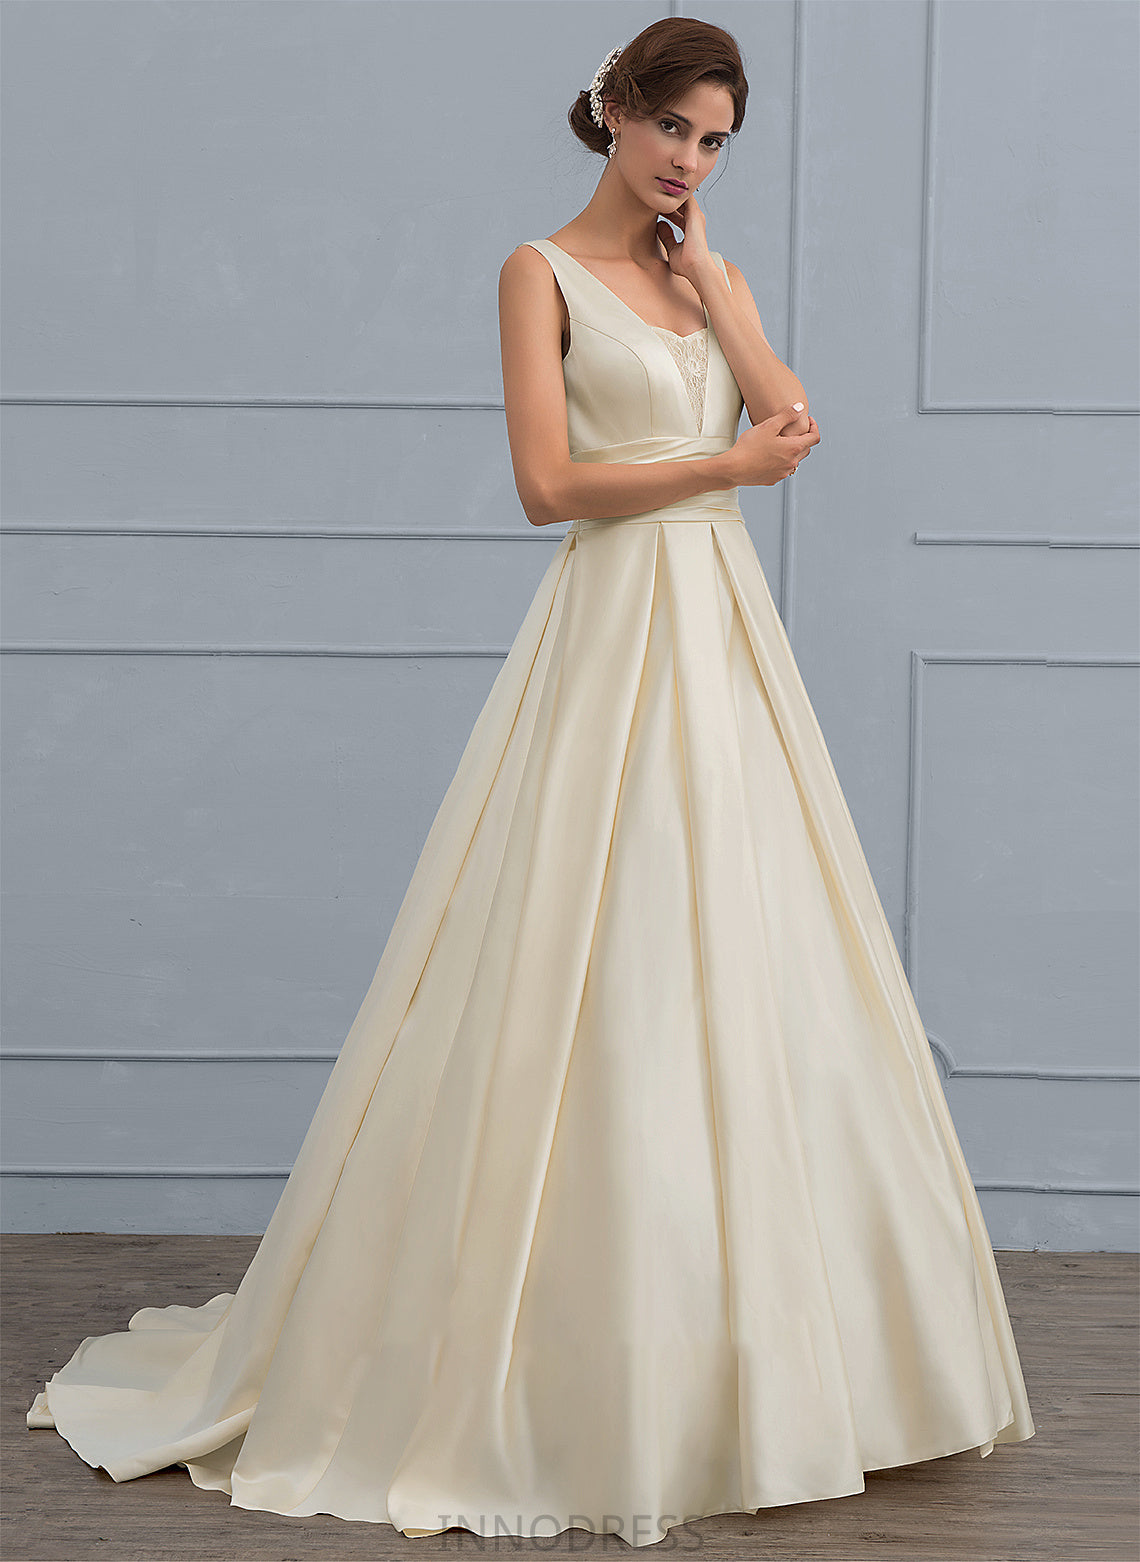 Dress Lace Train Wedding Dresses Satin Guadalupe V-neck With Ball-Gown/Princess Wedding Sweep